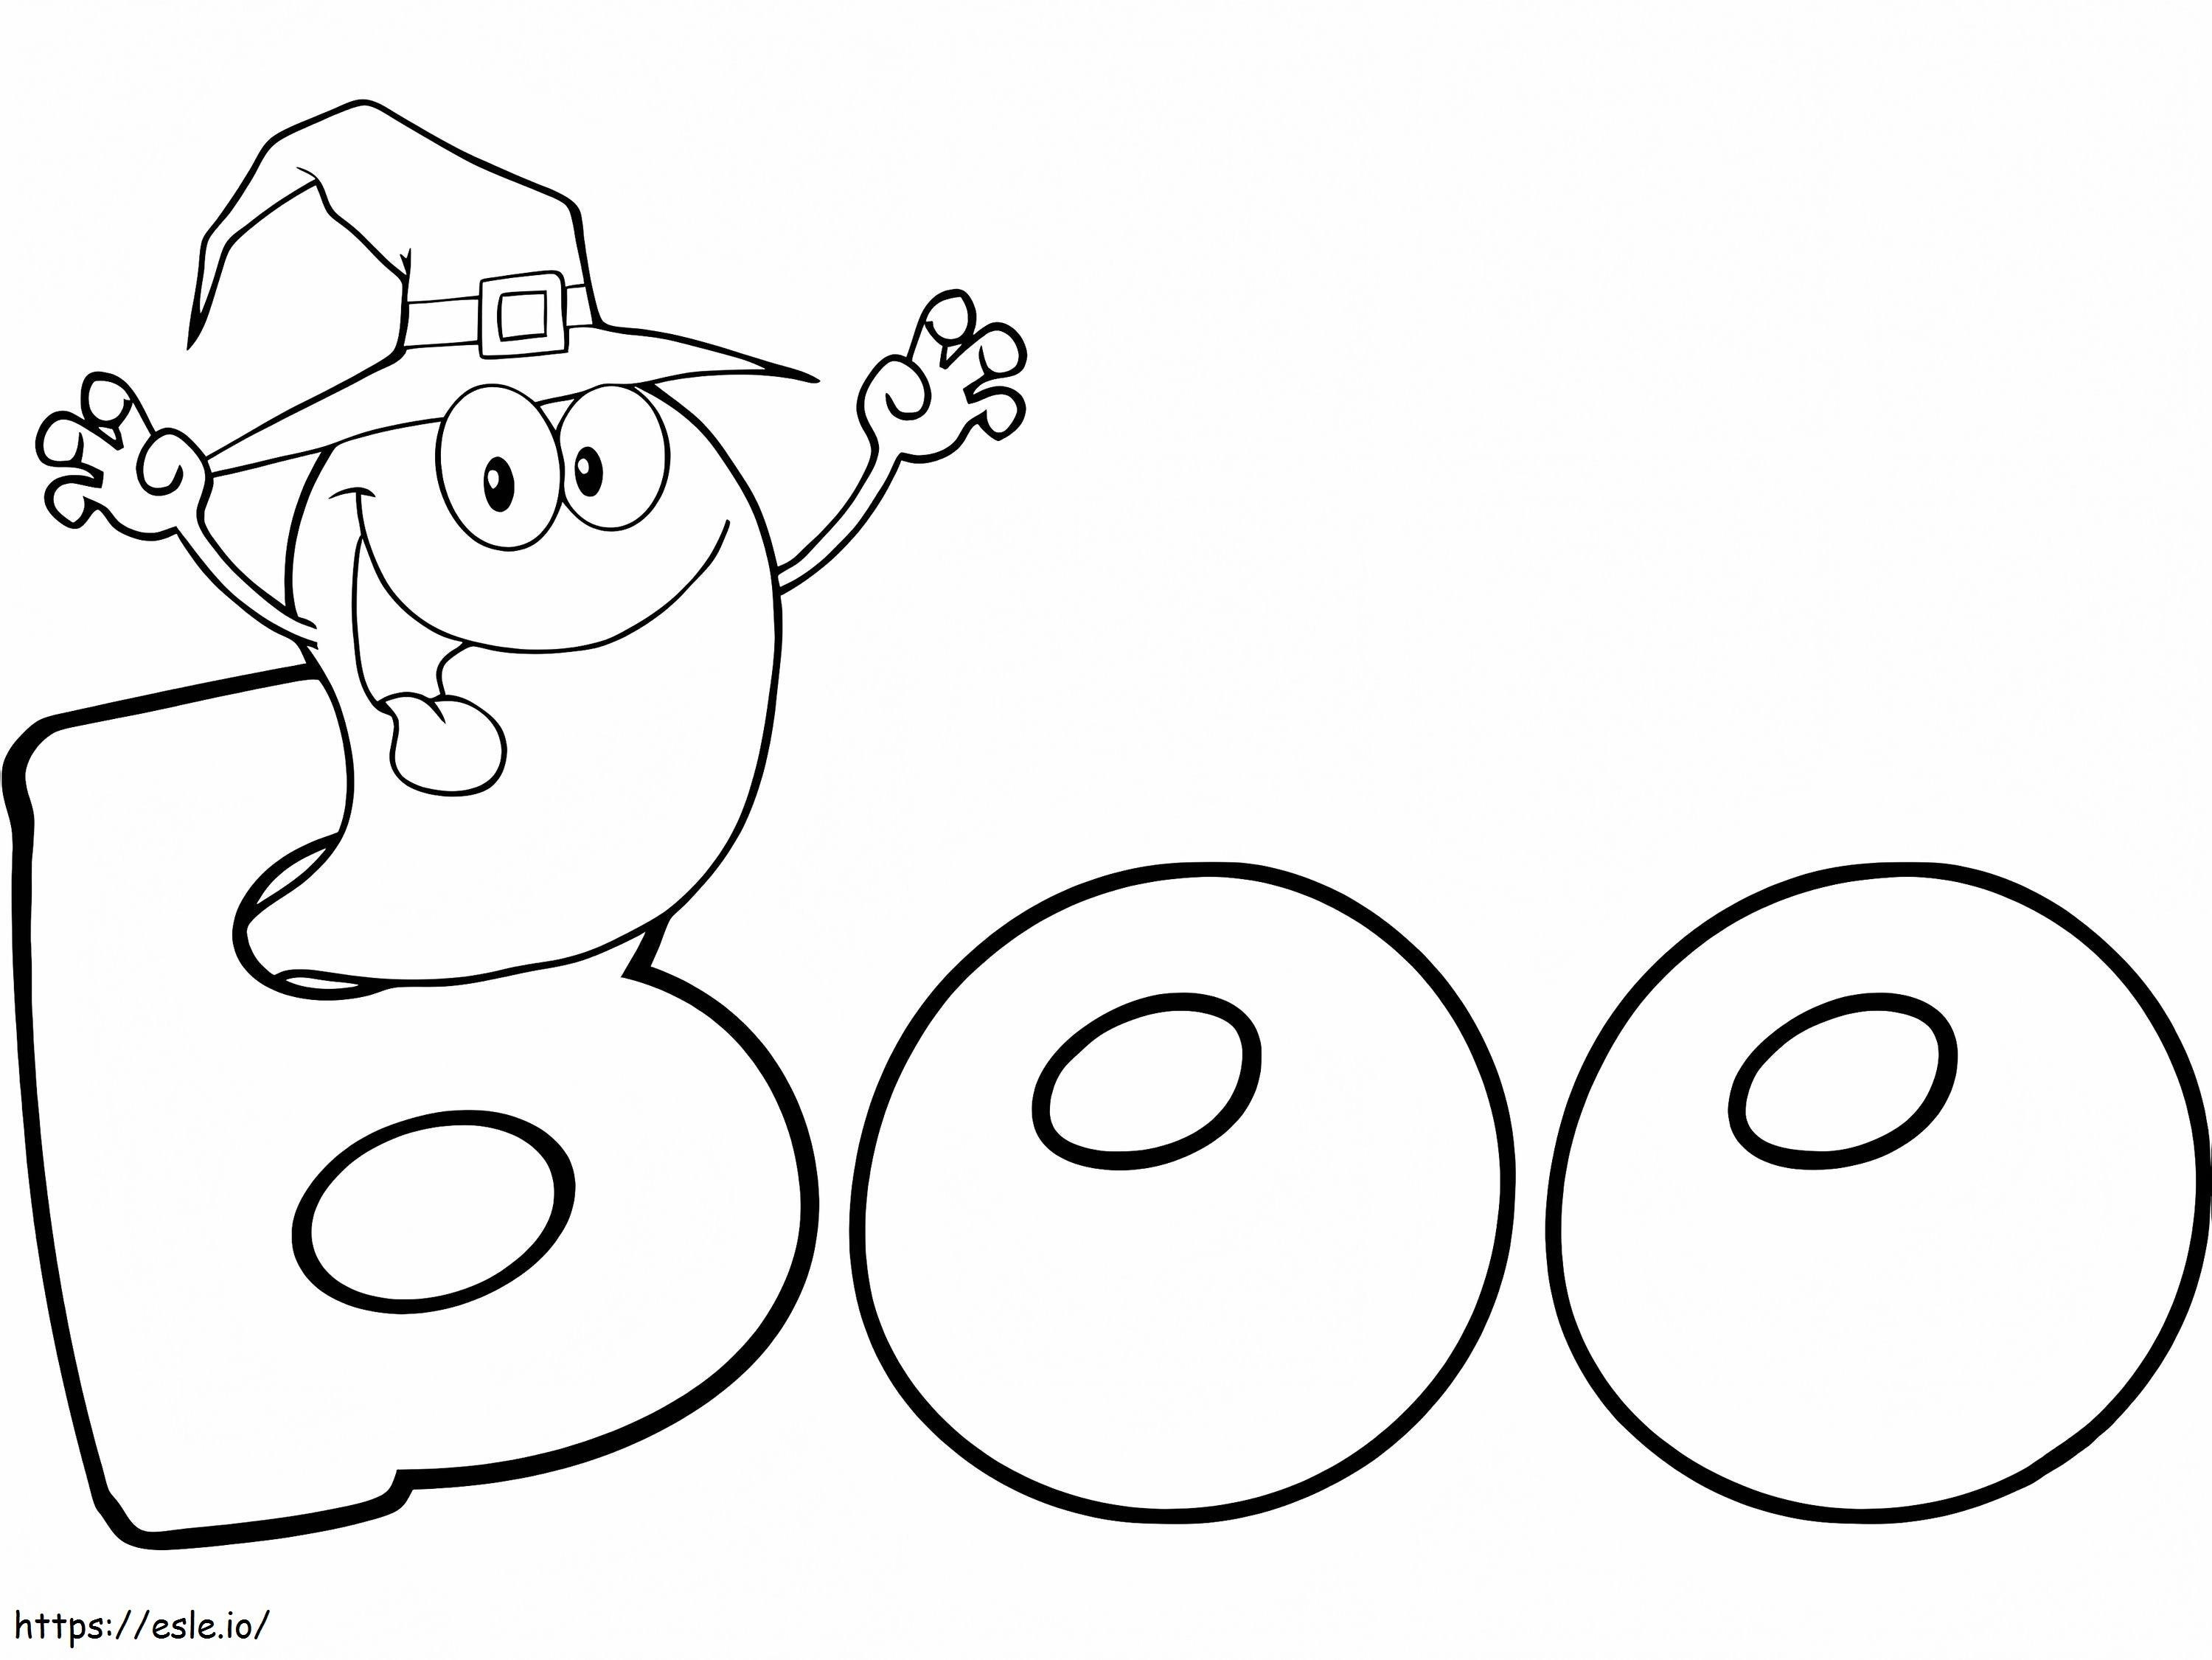 Boo coloring page